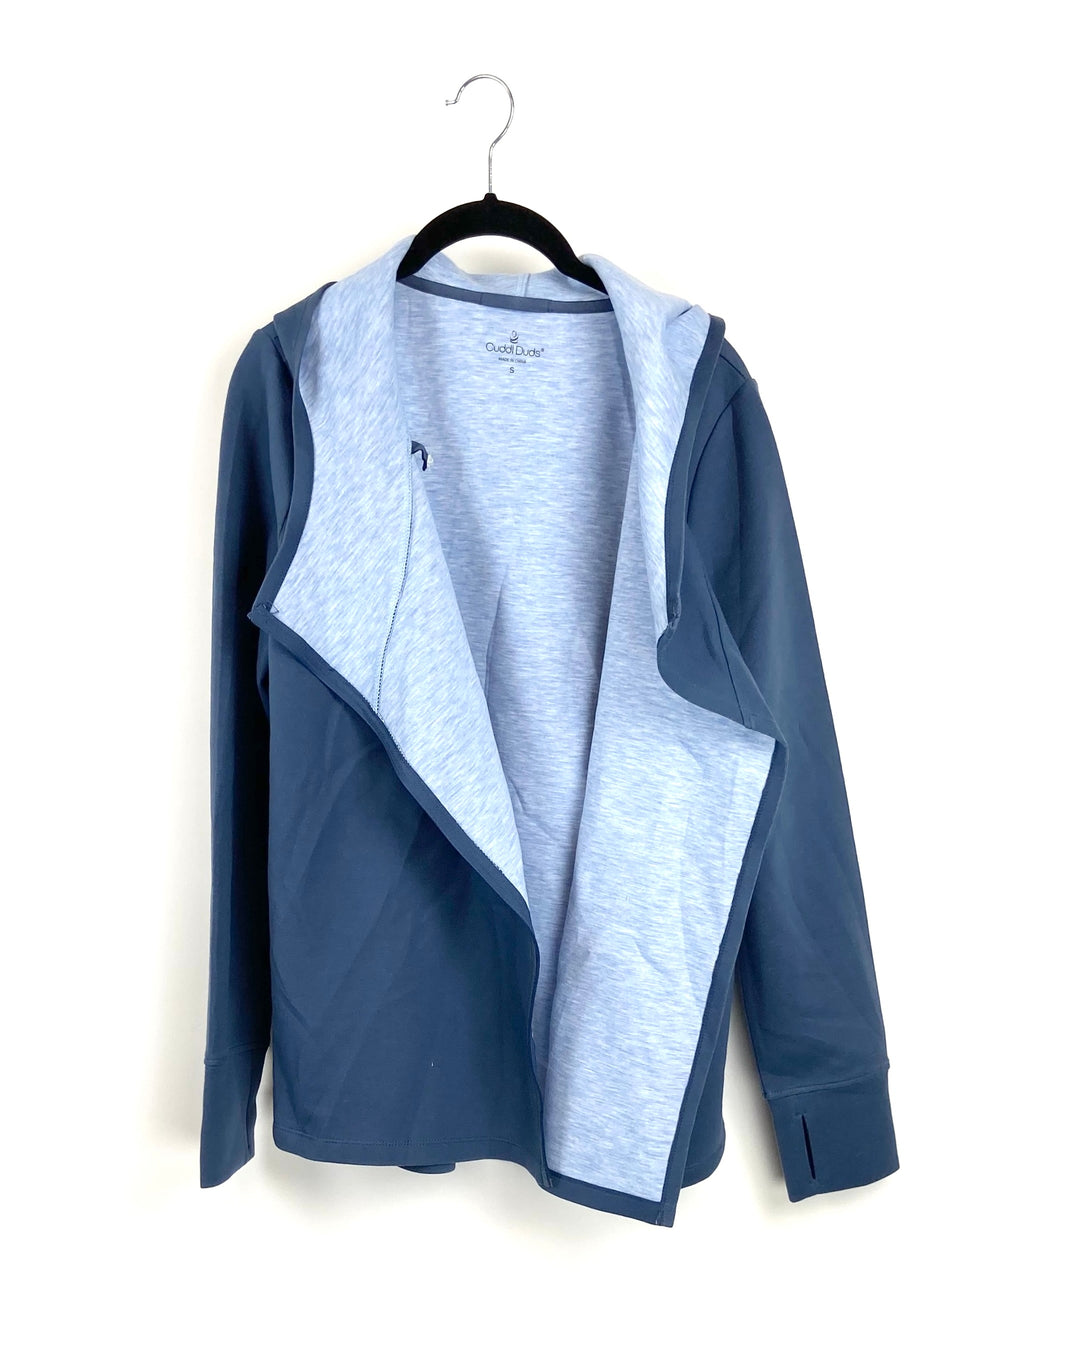 Blue Zip Up Jacket - Small